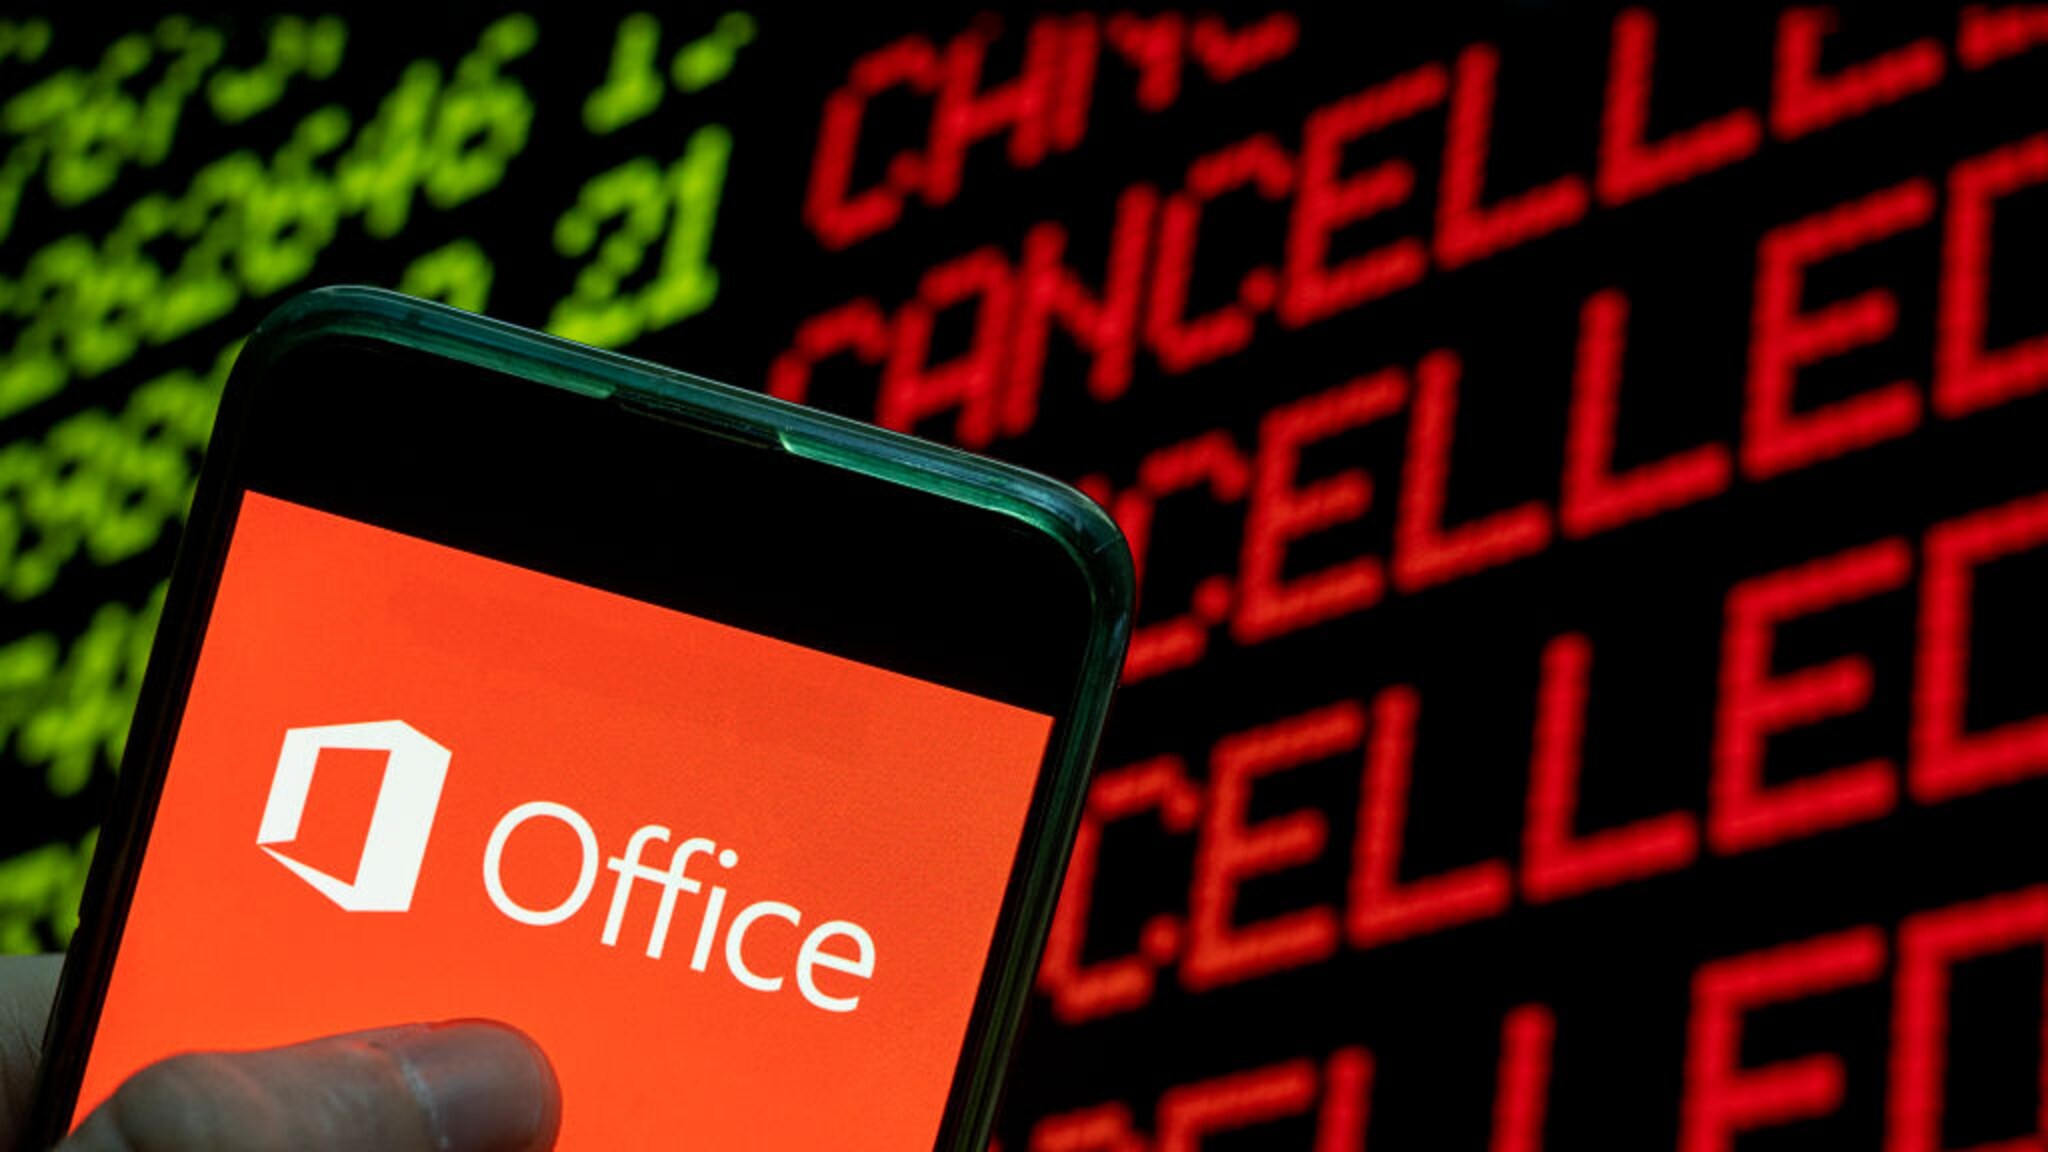 Microsoft: The Office brand name will disappear